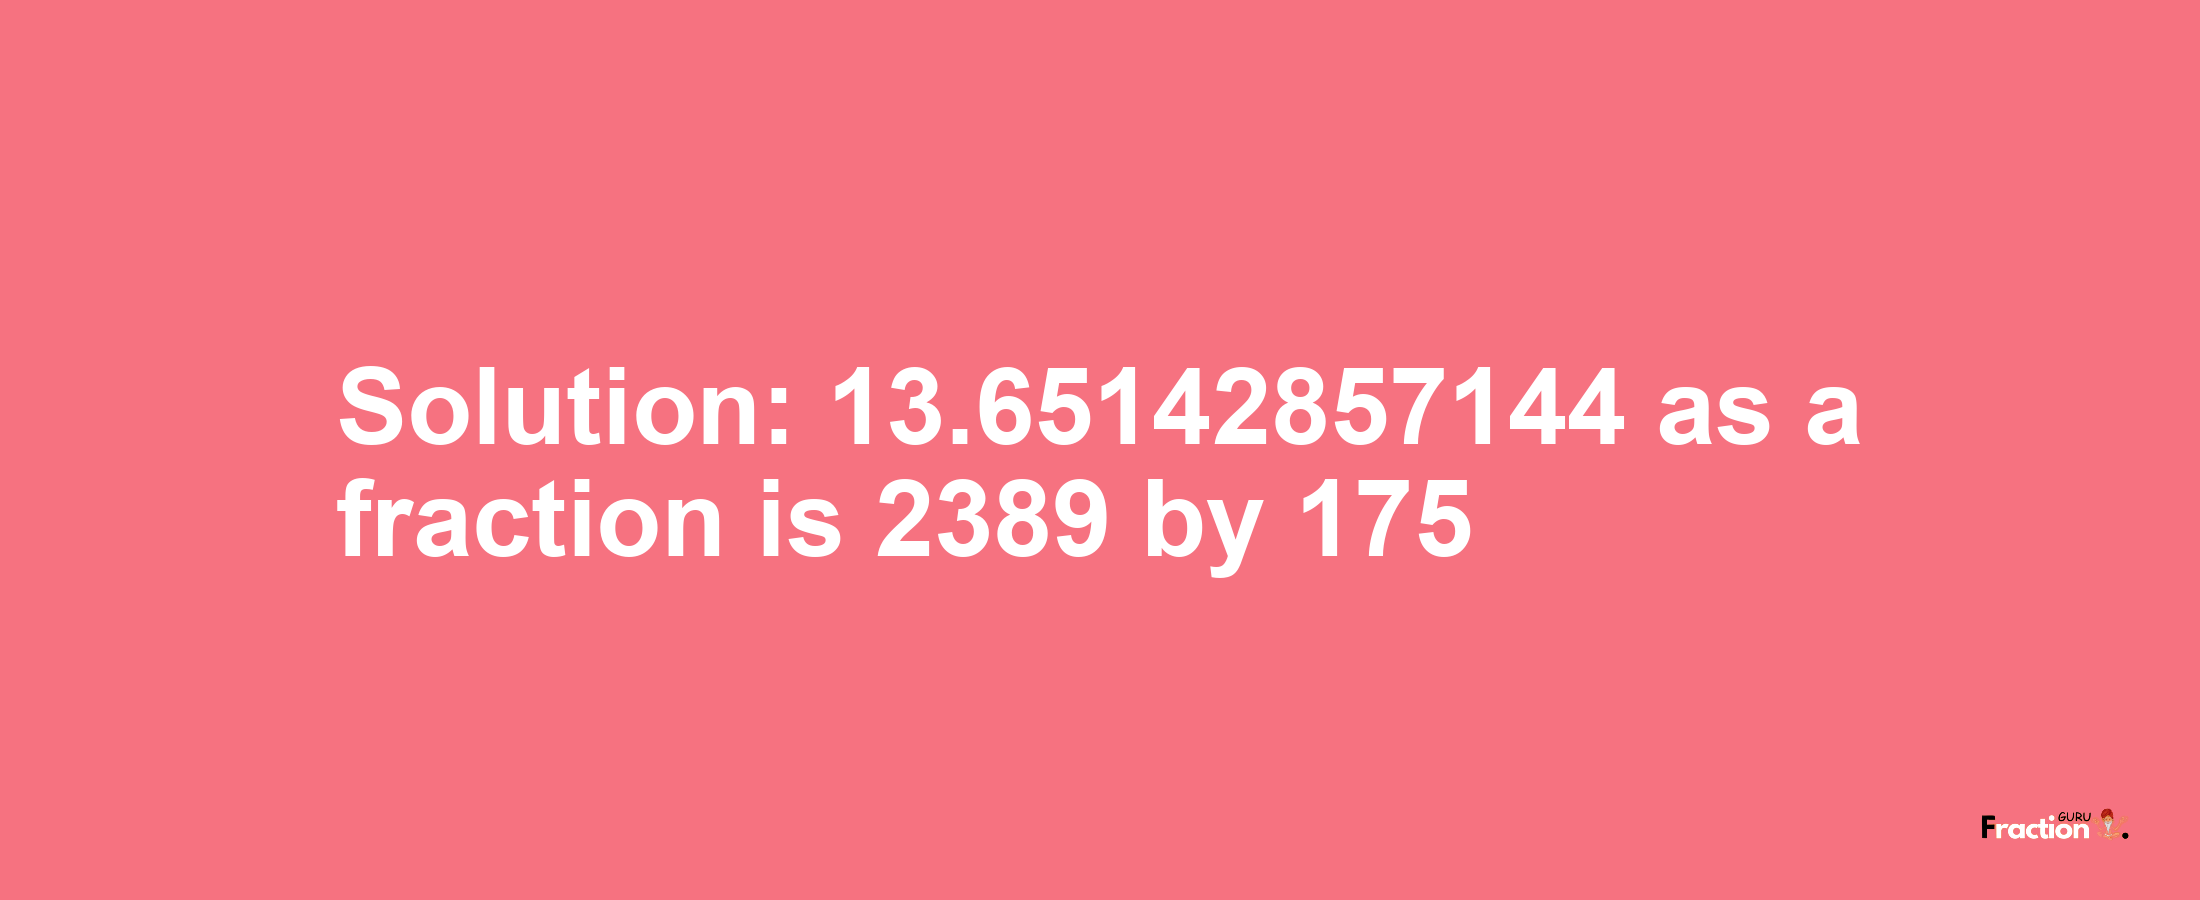 Solution:13.65142857144 as a fraction is 2389/175